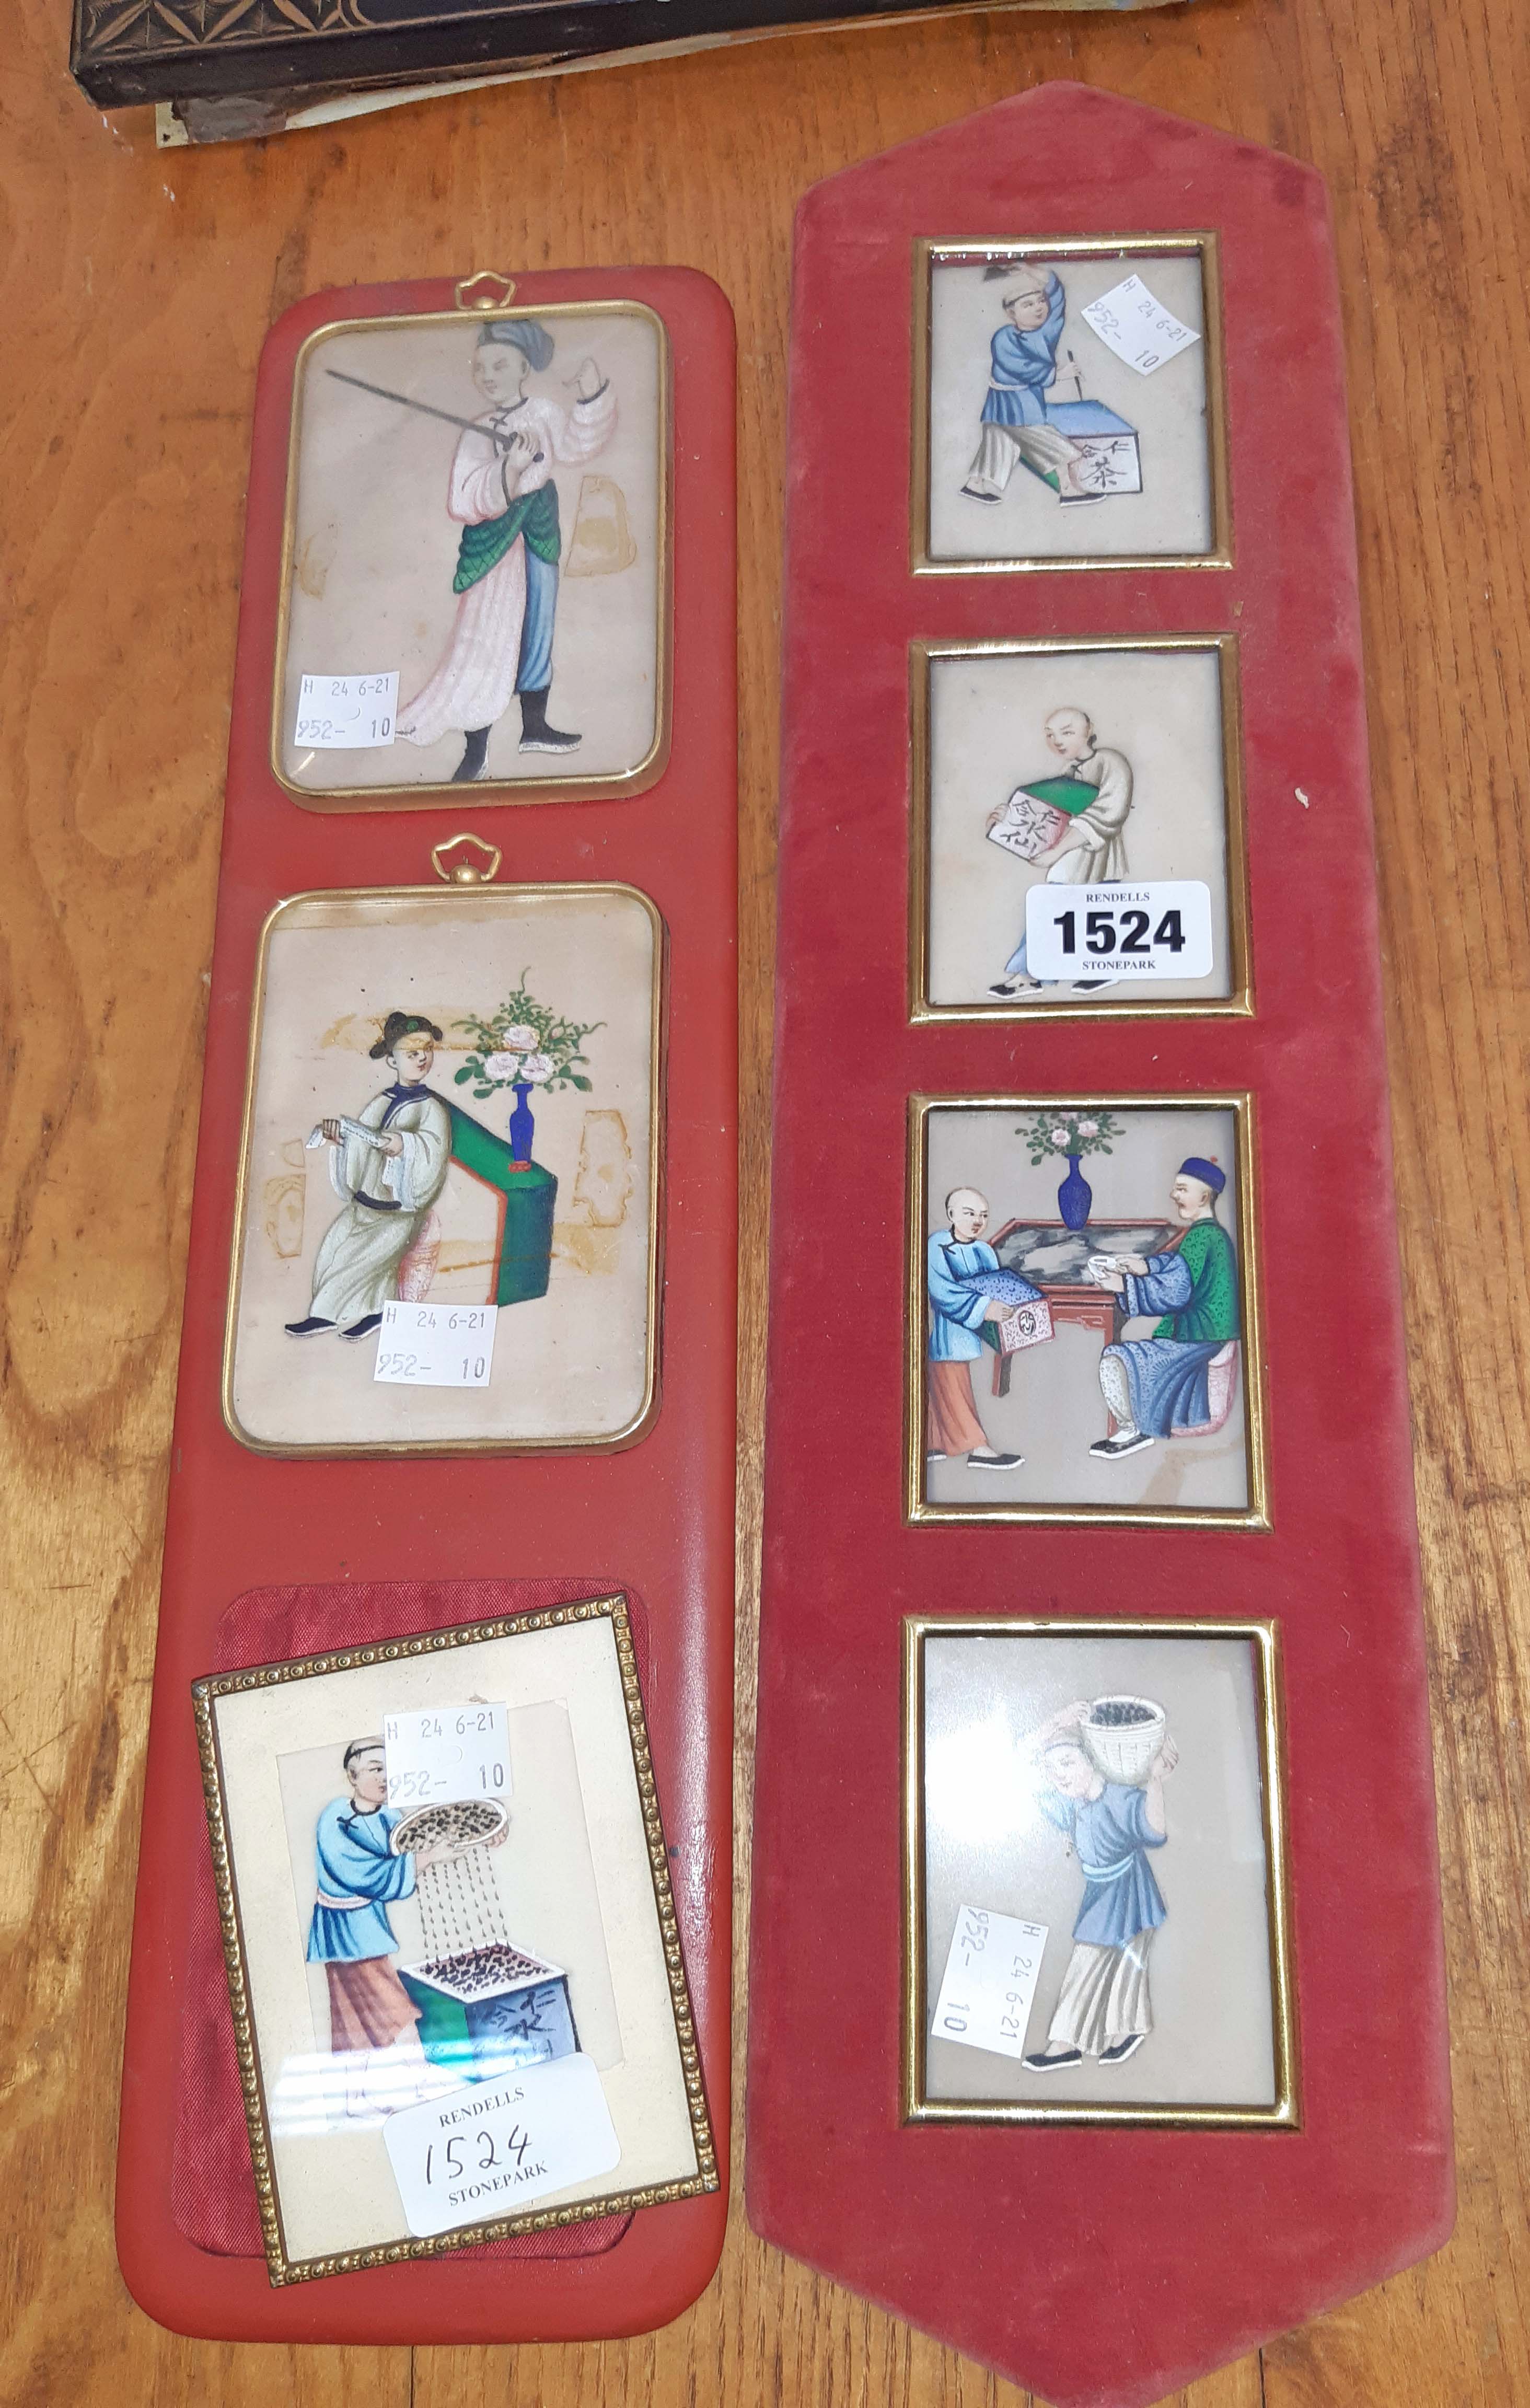 Seven framed Chinese small pith paper paintings, depicting various figures and tradesmen - part